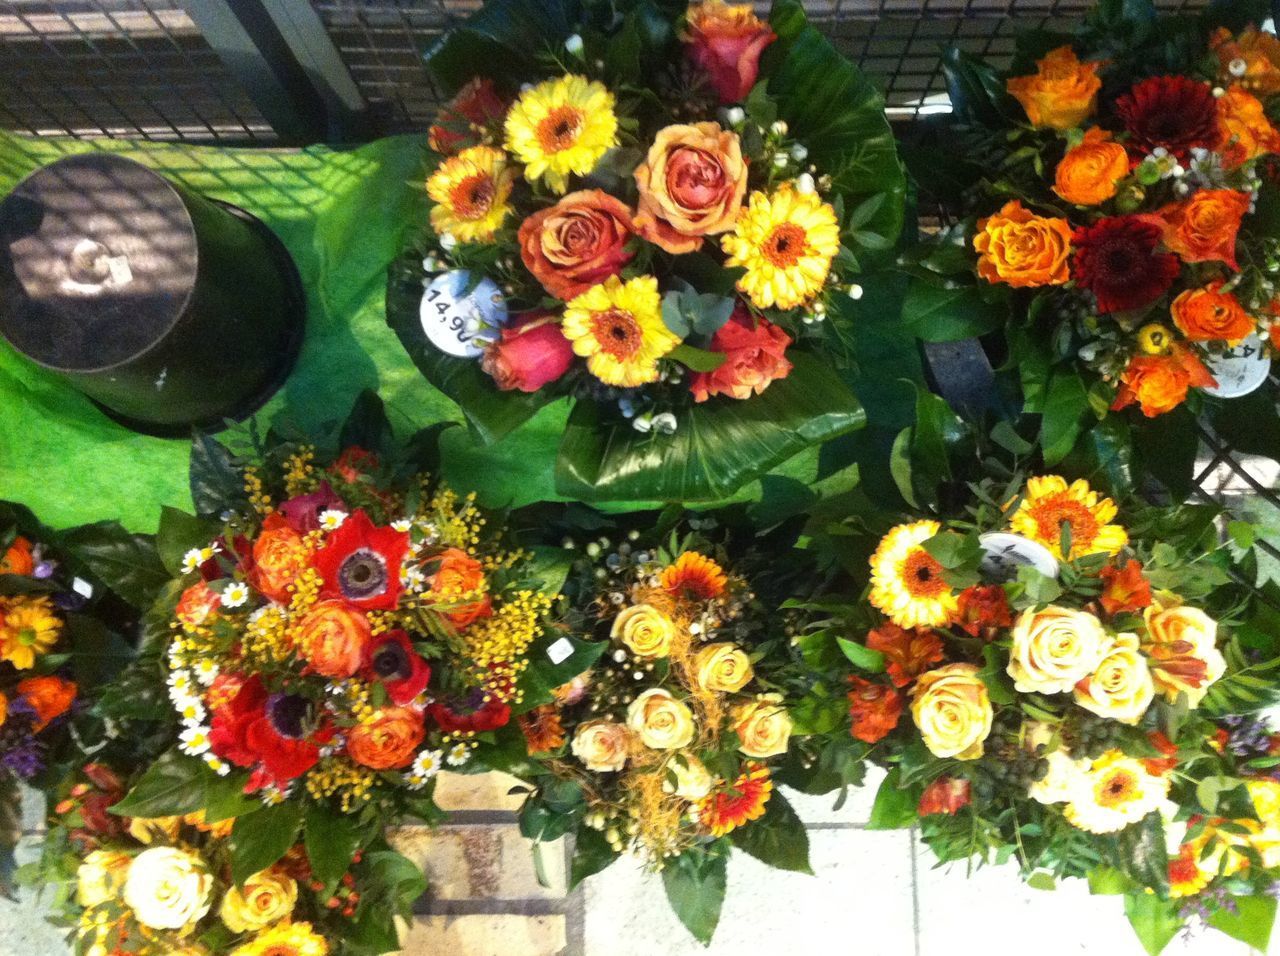 HIGH ANGLE VIEW OF VARIOUS FLOWERS ON TABLE